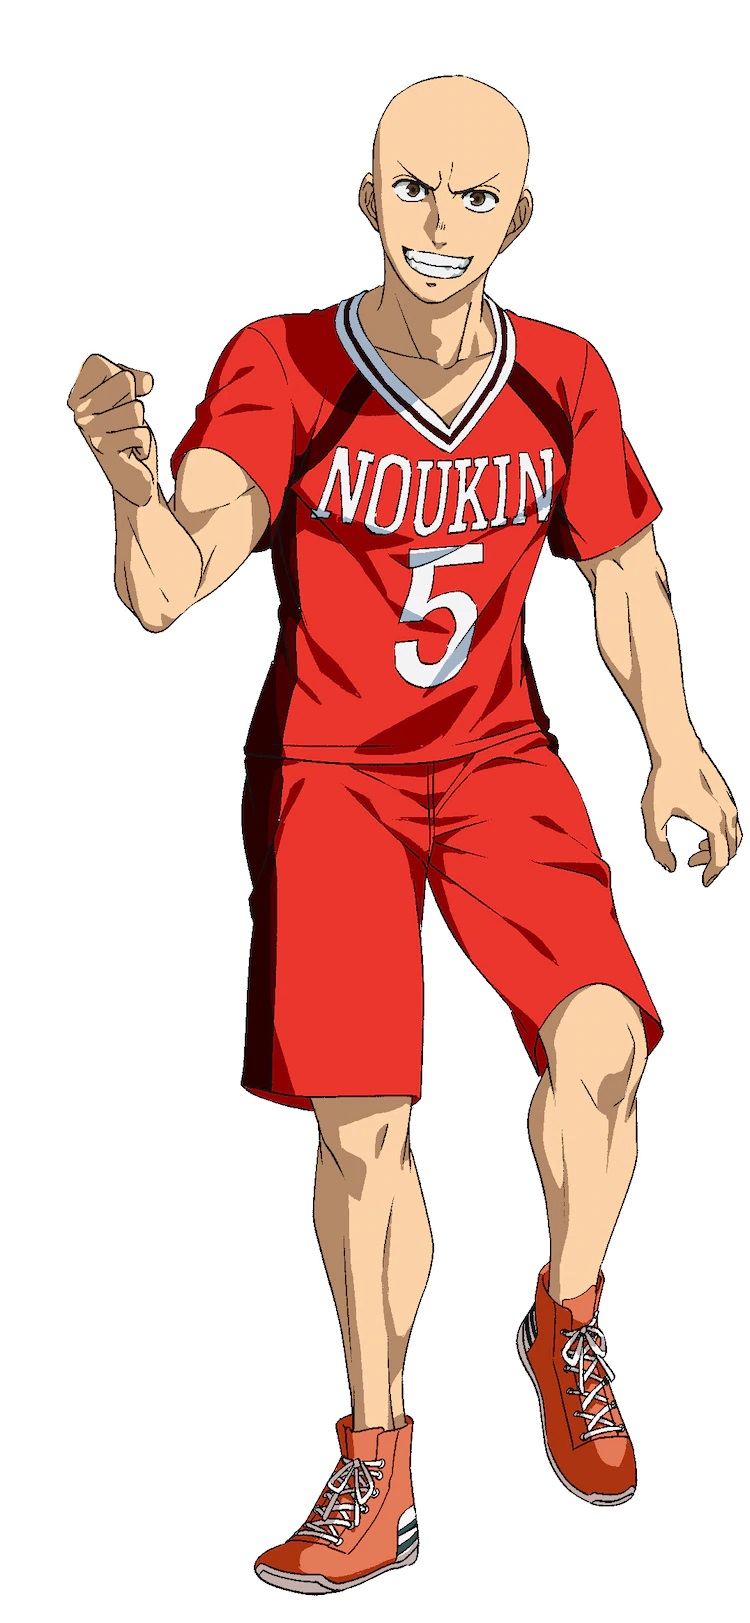 A character visual of Souma Azemichi, a small but powerful member of the Noukin High School kabaddi club. Souma is quite muscular despite his small stature, and his head is shaved.